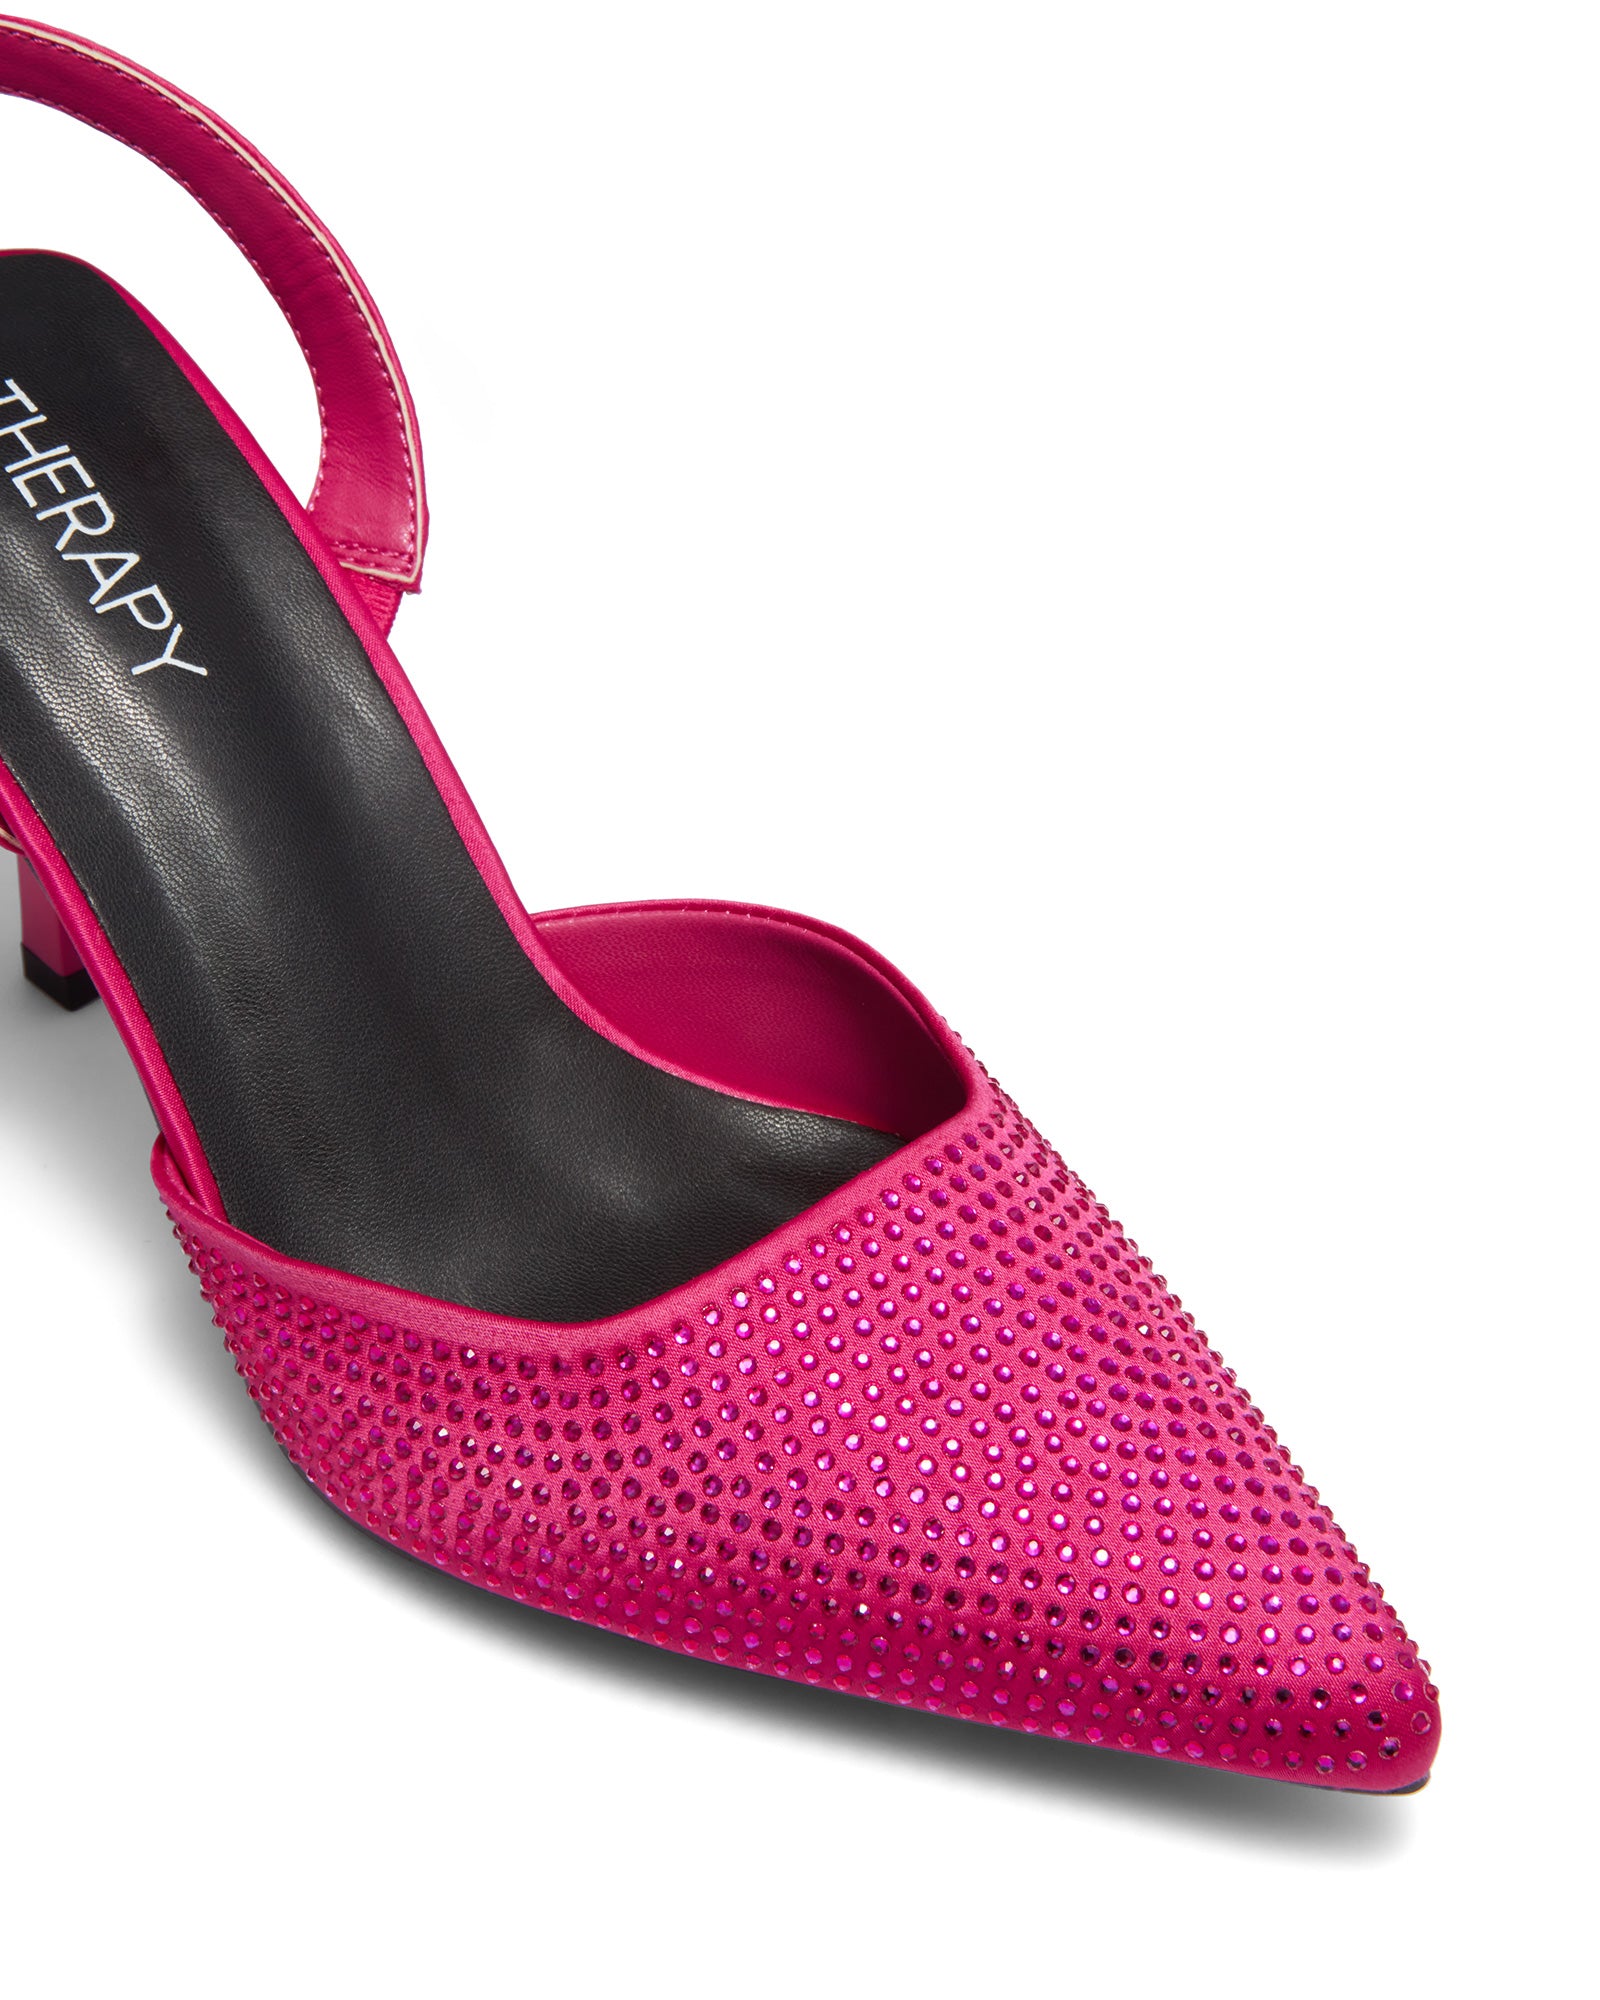 Therapy Shoes Adorn Pink | Women's Heels | Sandals | Stiletto | Slingback